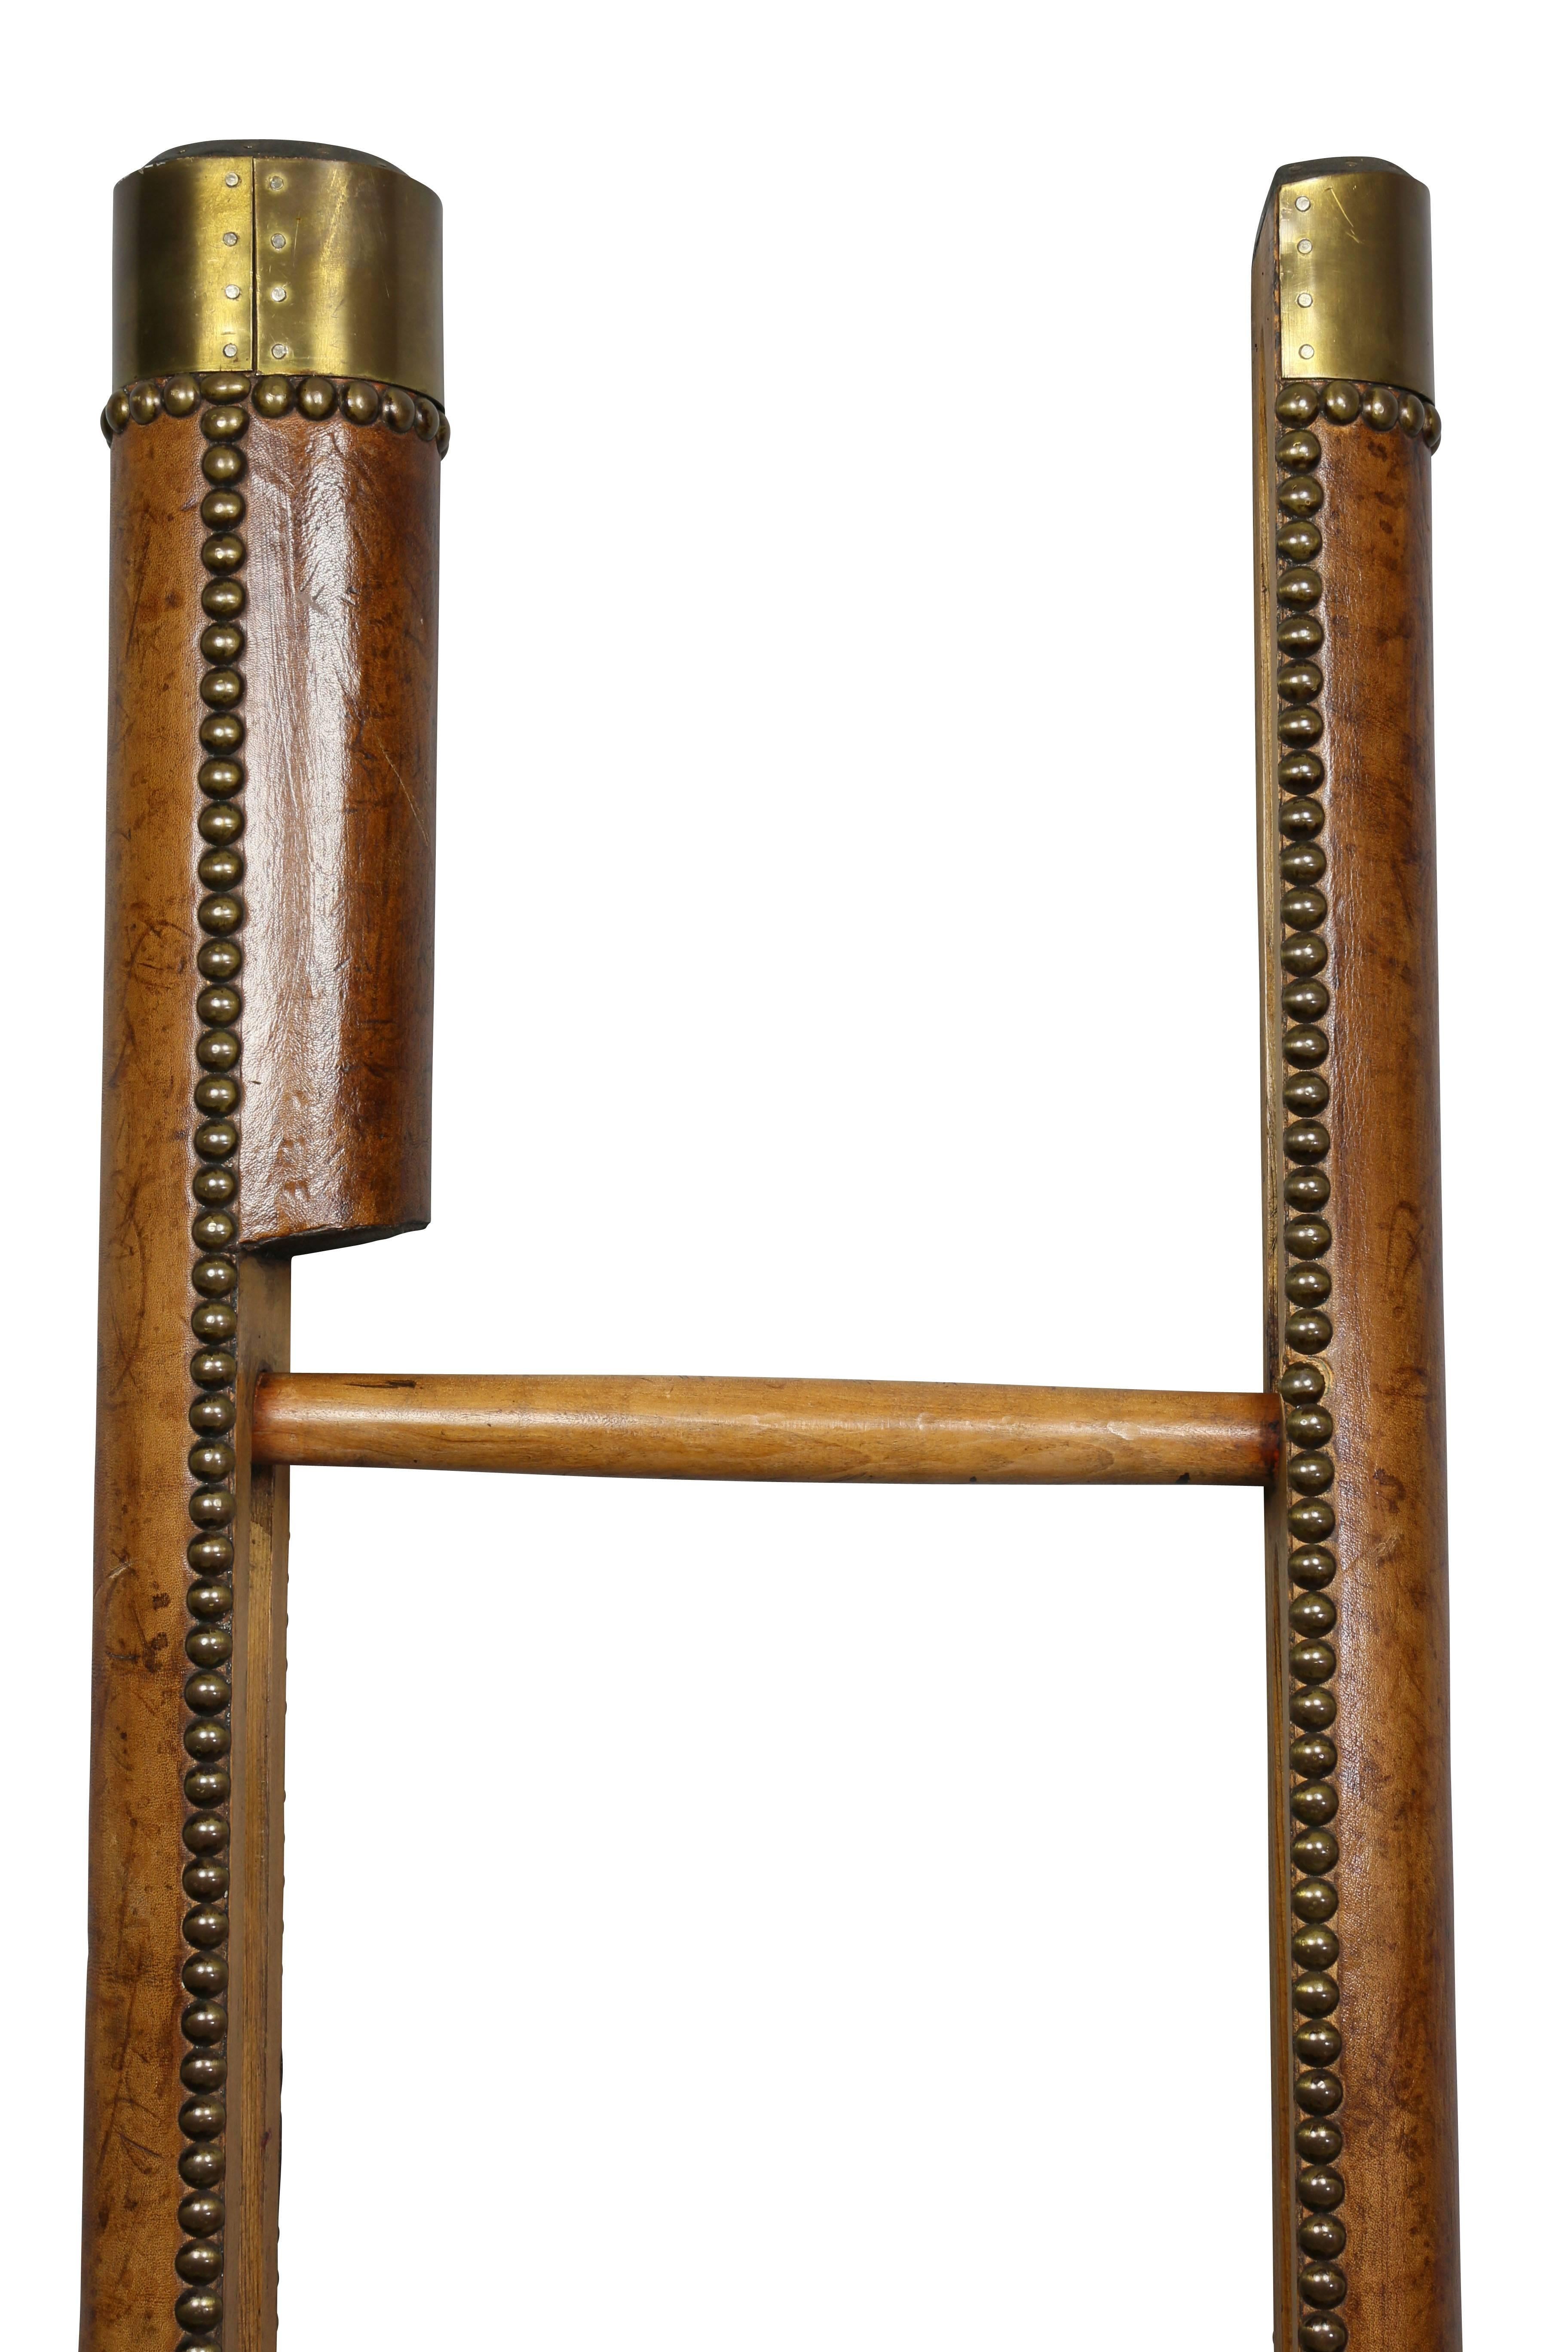 Edwardian brown leather and brass tack library stick ladder. Typical form.